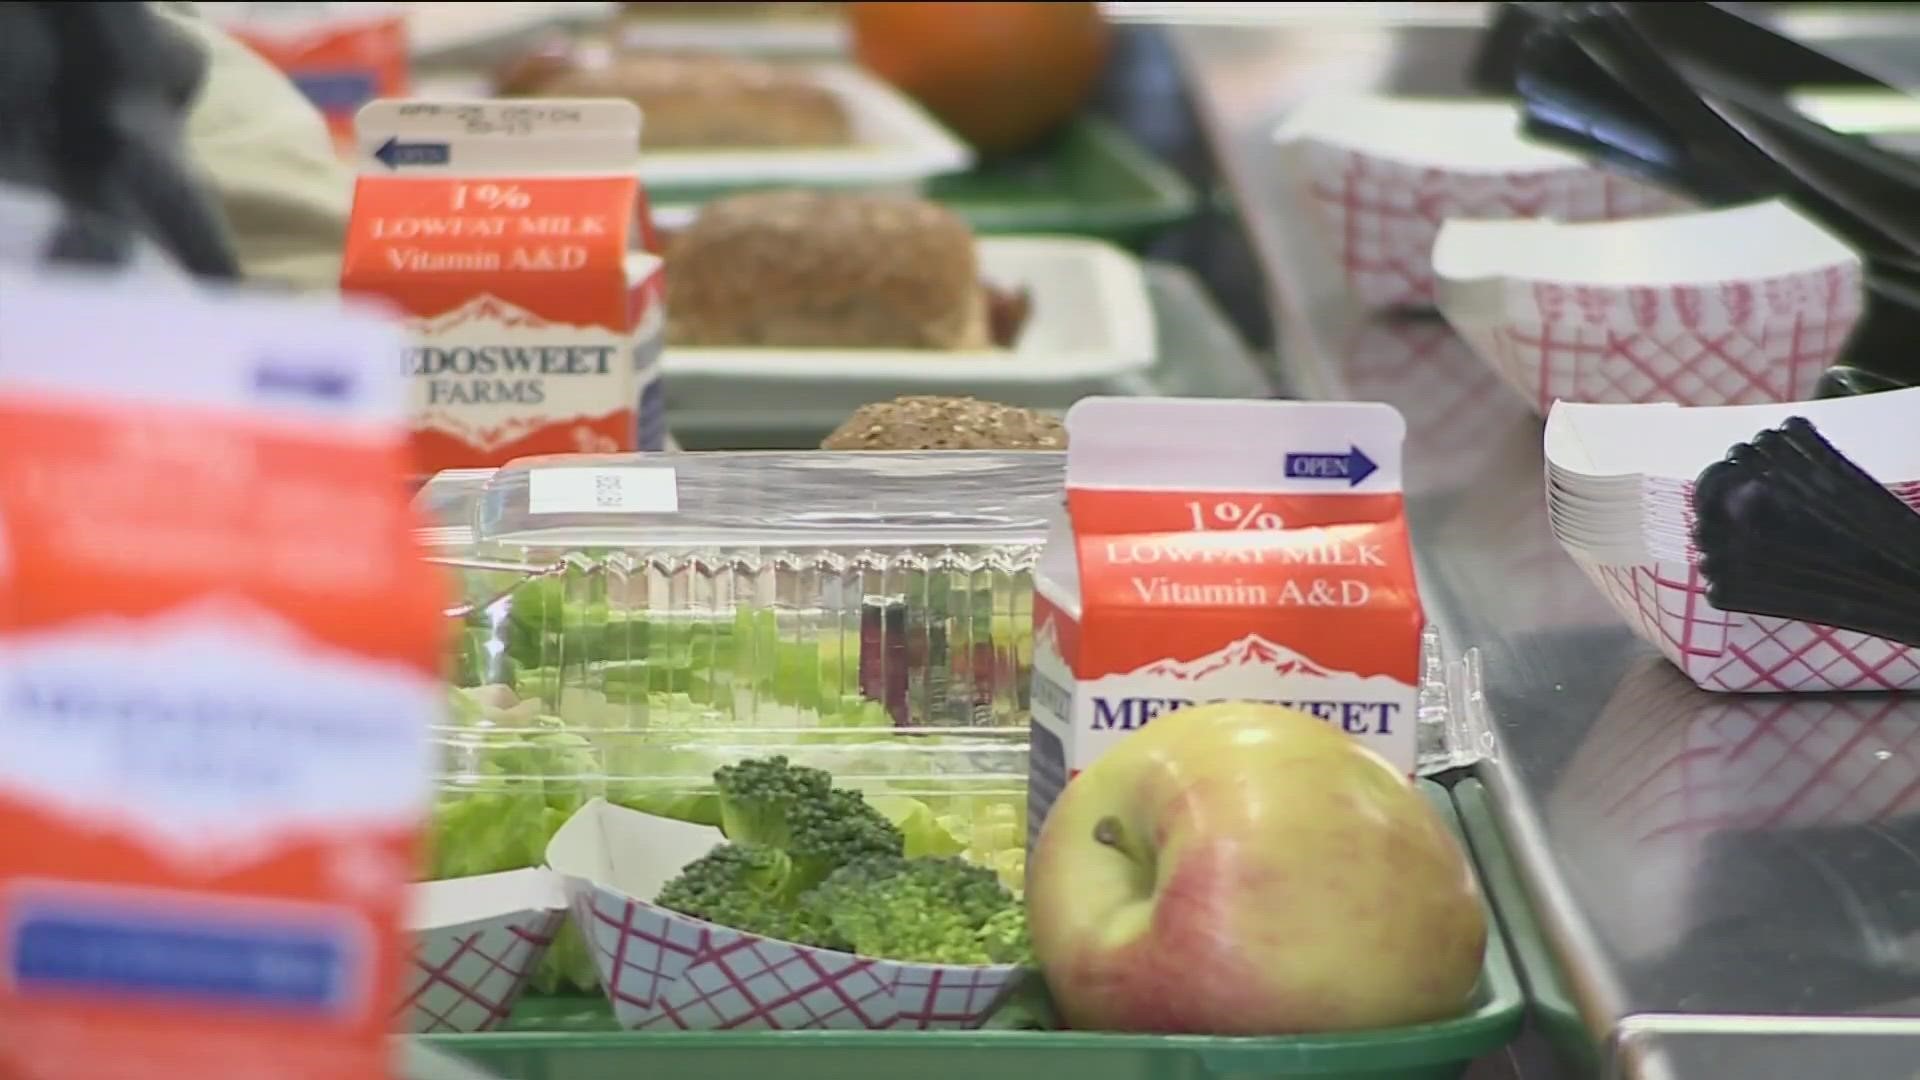 Two bills were introduced in Washington's legislature that would eliminate the income barrier for getting school lunches, and allow all students to eat free.